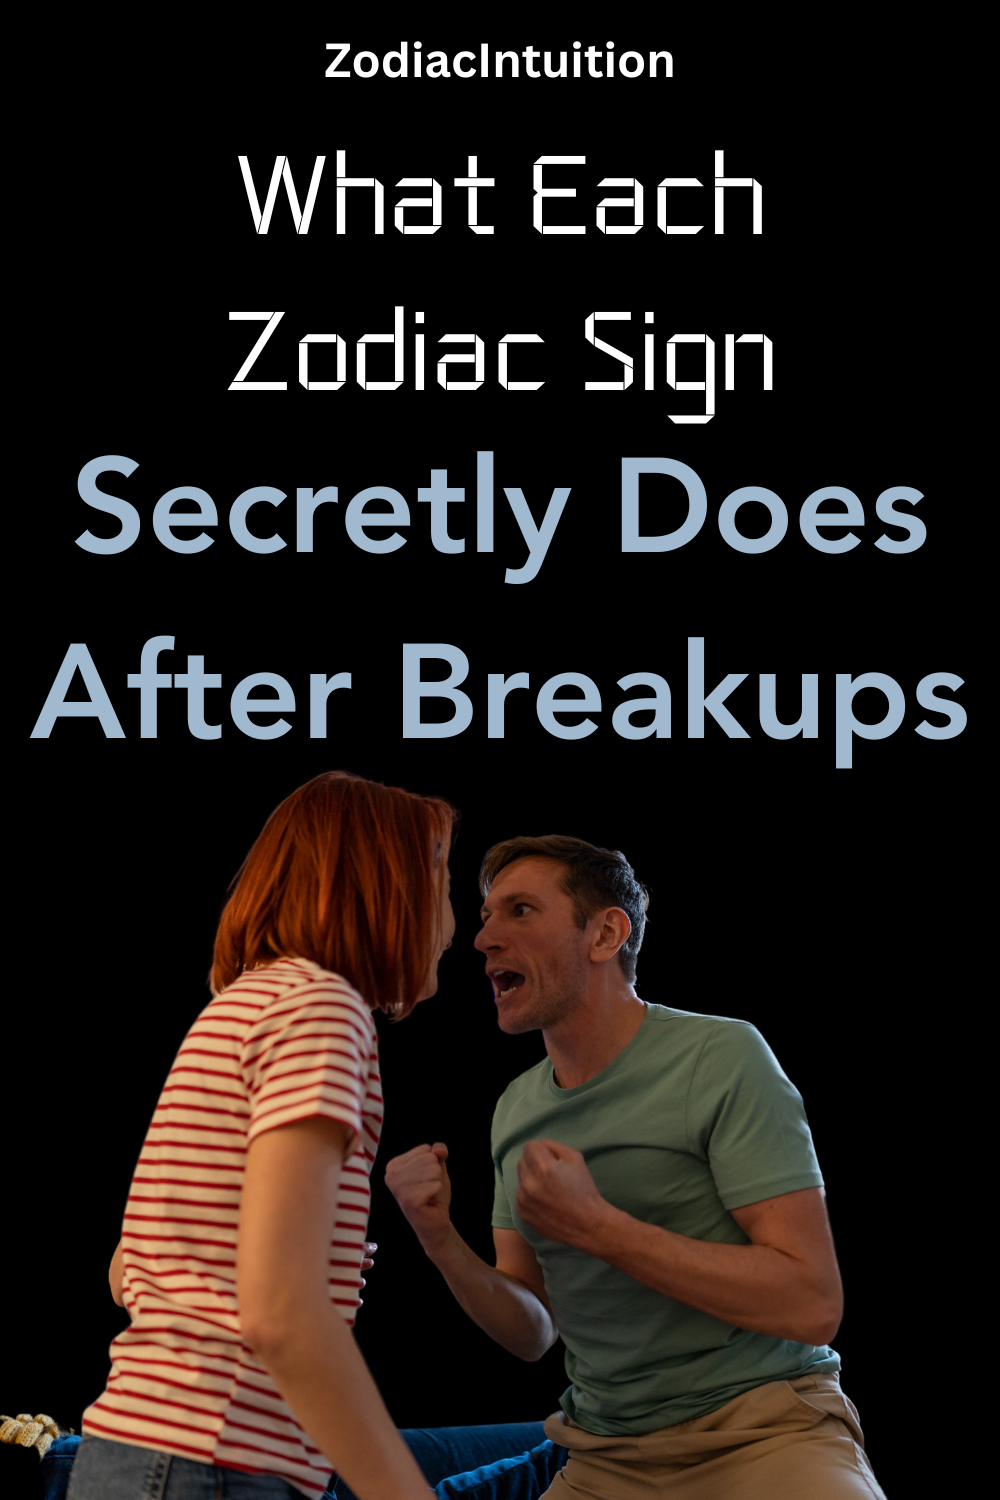 What Each Zodiac Sign Secretly Does After Breakups